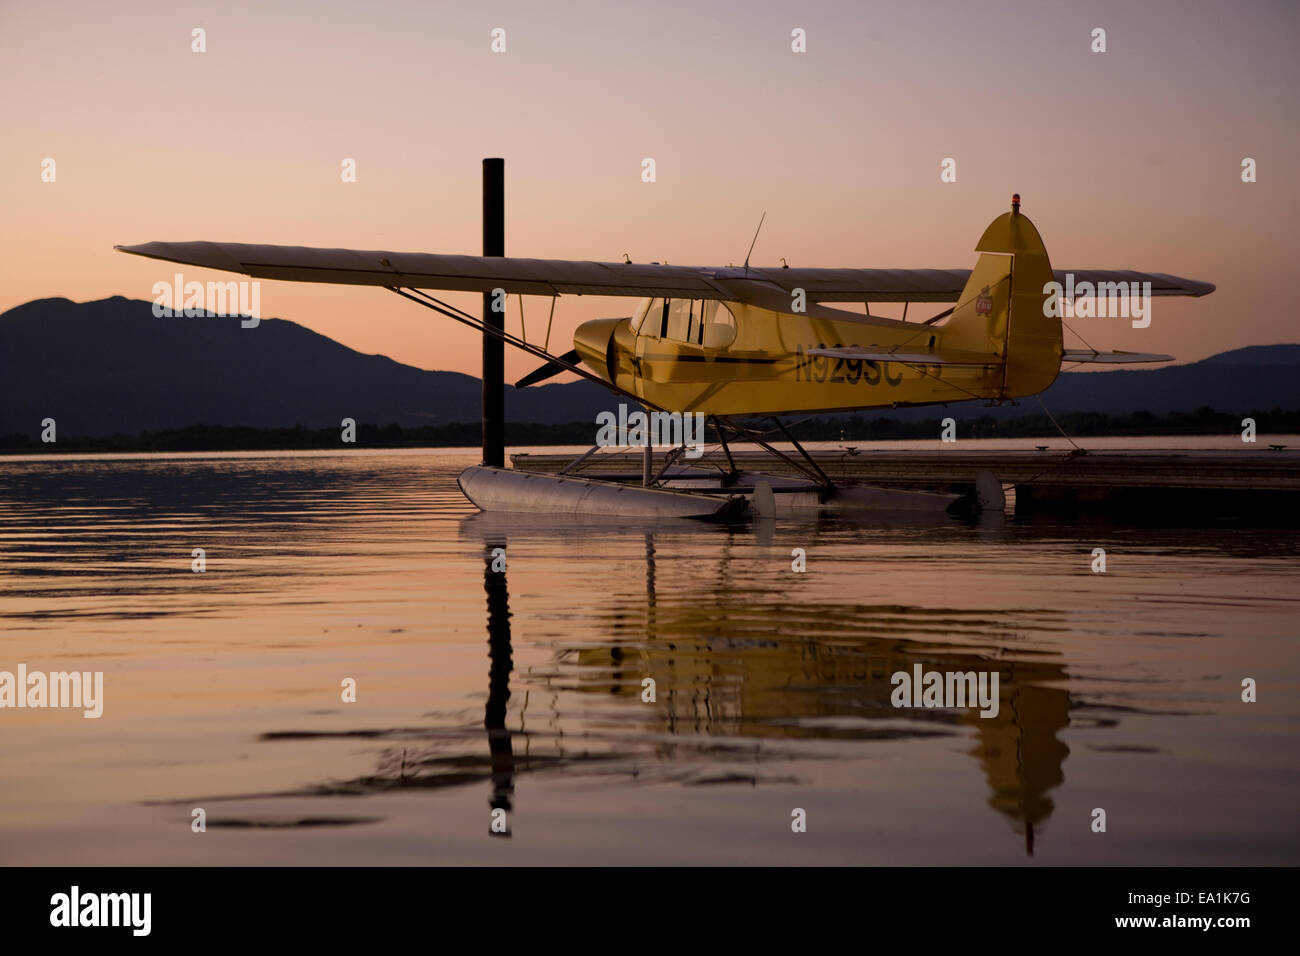 Piper Cub on Floats docked at the Seaplane Splash-In, Lakeport, California, Lake County, California Stock Photo